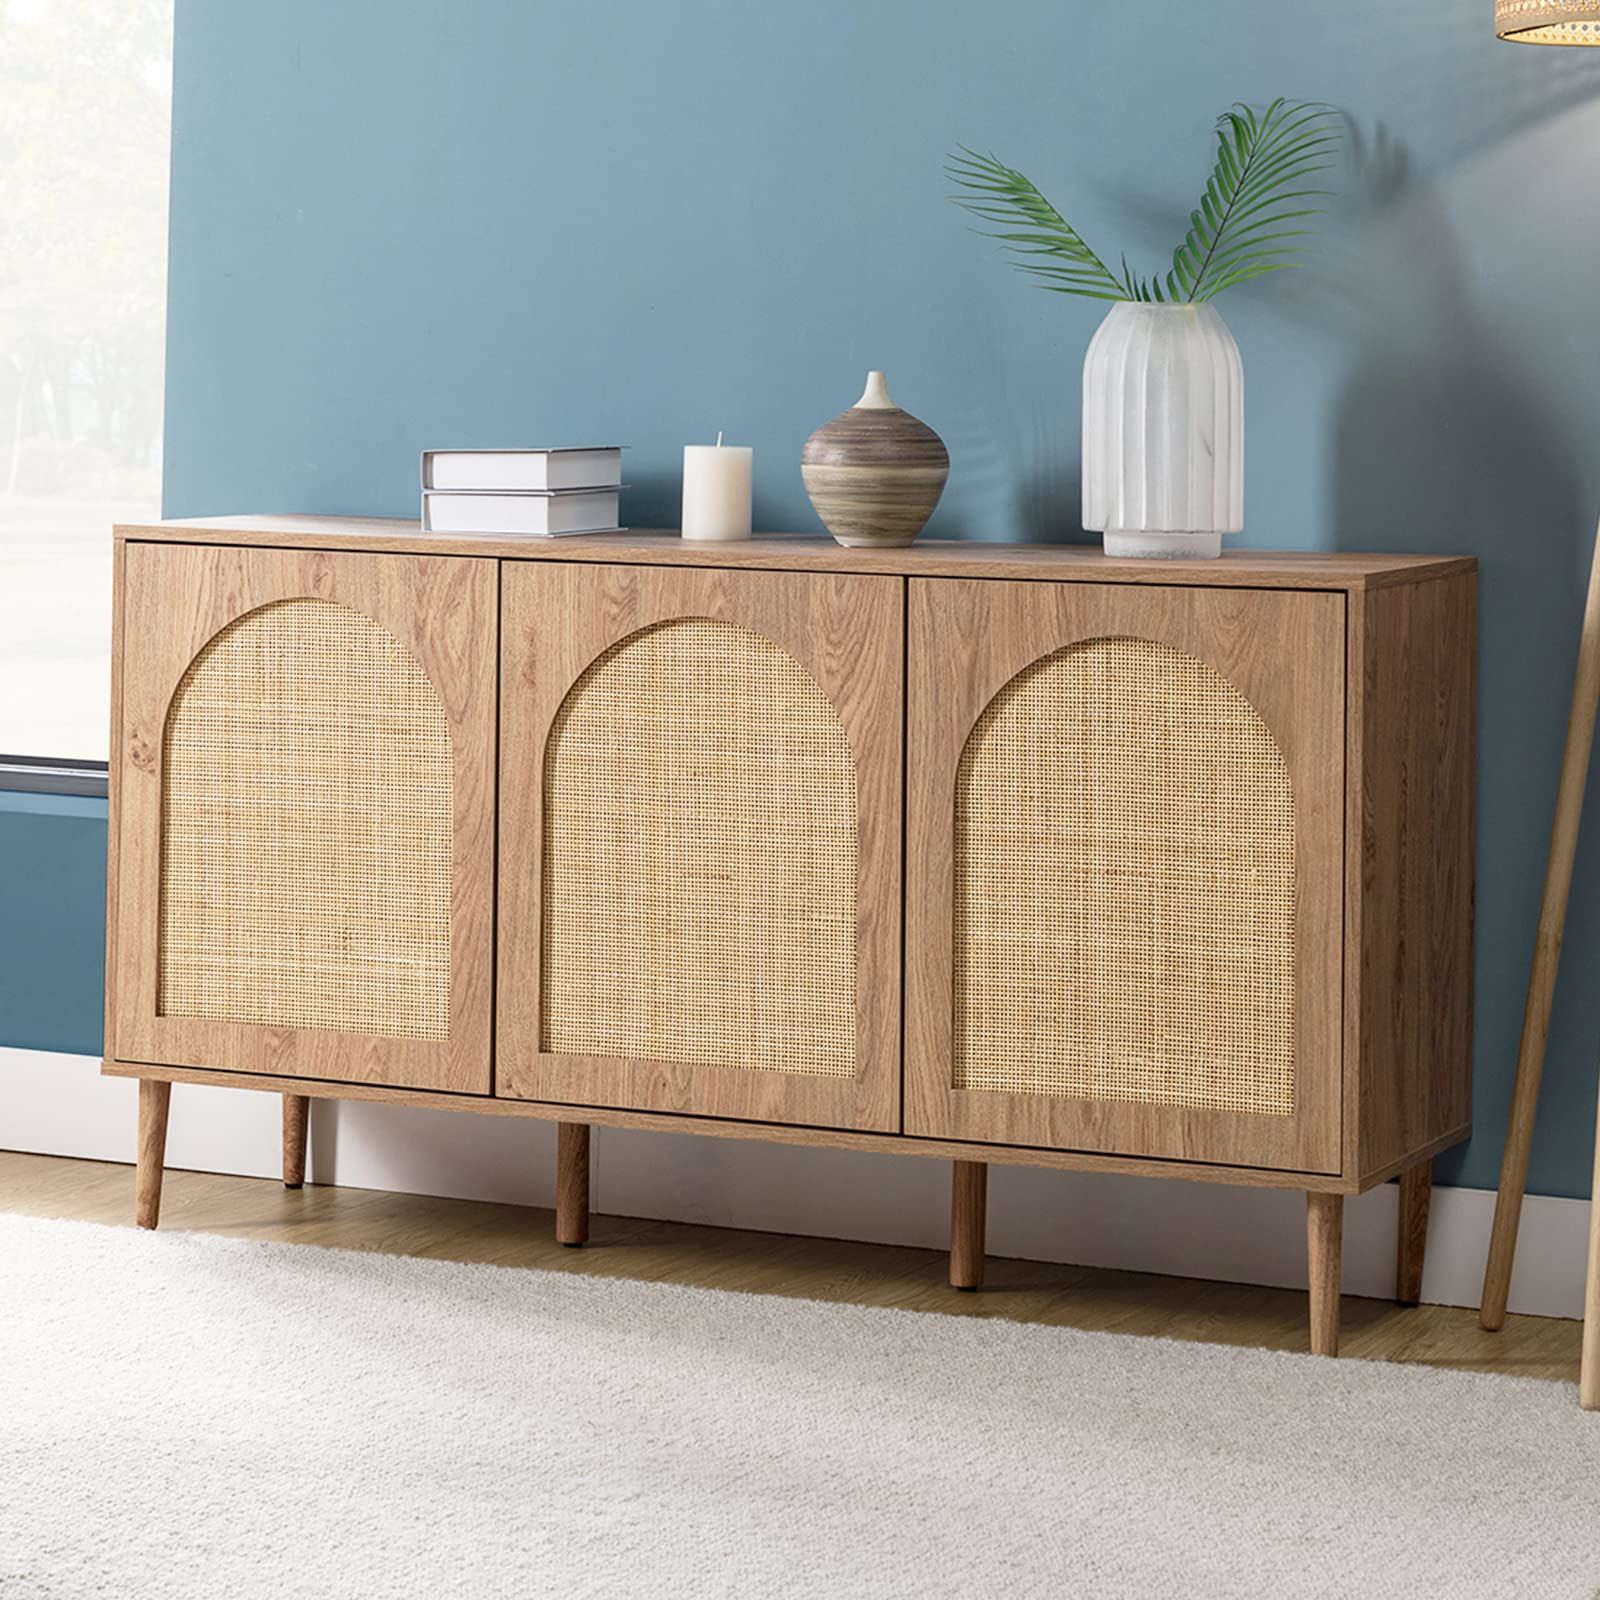 Latest Buy Hulala Home Farmhouse Boho Sideboard Buffet Cabinet With 3 Rattan Doors  And 3 Shelves, Kitchen Storage Credenza With Solid Wood Legs, Modern Accent  Console Table For Living Room & Dining Room, Throughout Rattan Buffet Tables (View 7 of 10)